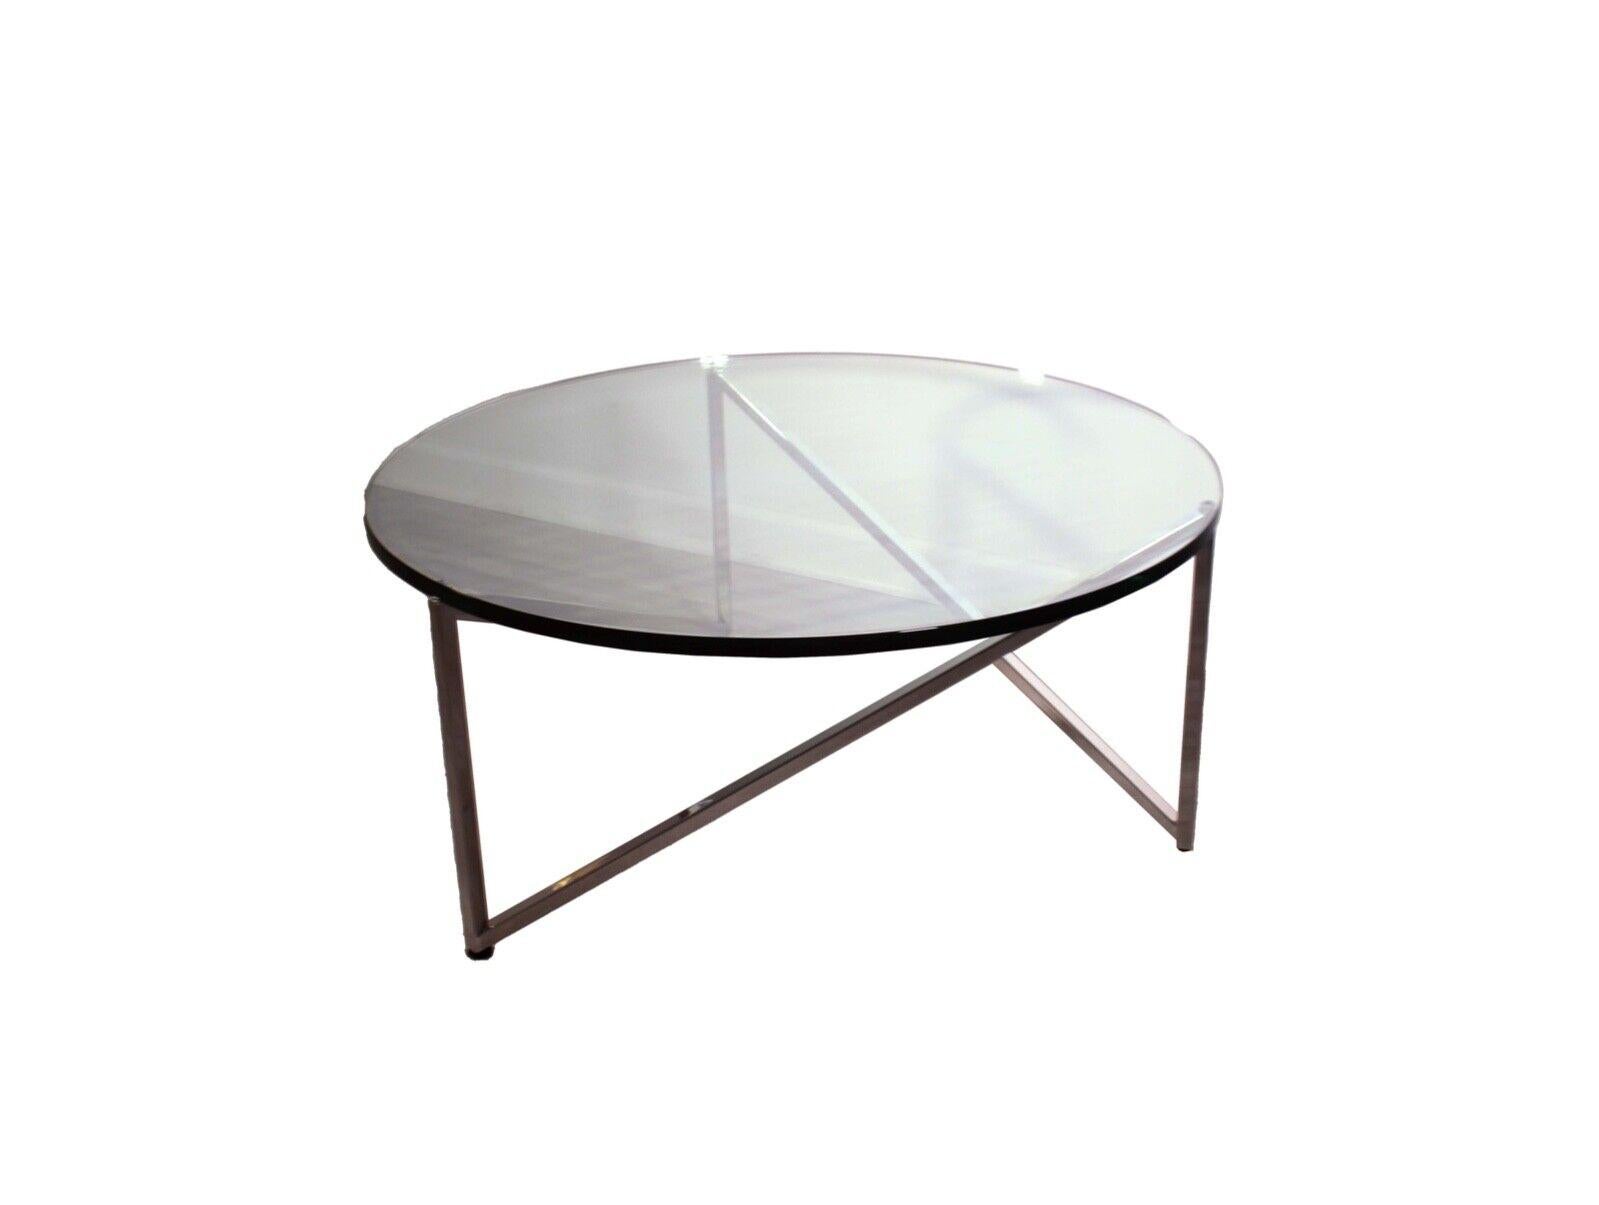 This contemporary round glass top coffee table features a stainless steel base with a sleek, modern design attributed to Breuton. The thick glass top provides a sturdy and eye-catching surface that is sure to be a conversation starter. The stainless